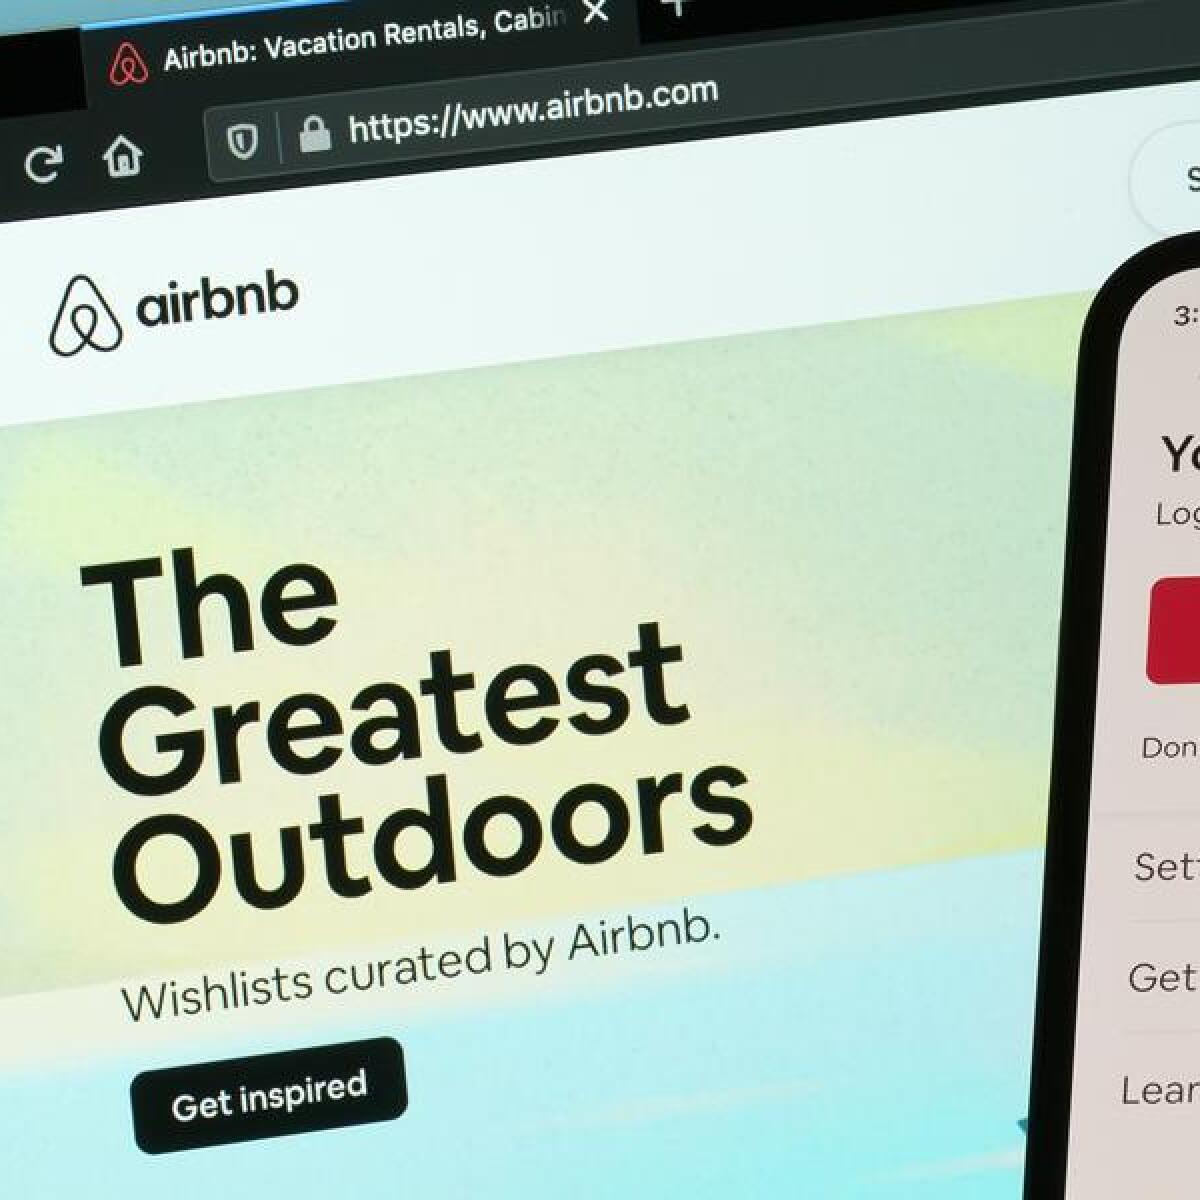 The login page for Airbnb's phone app